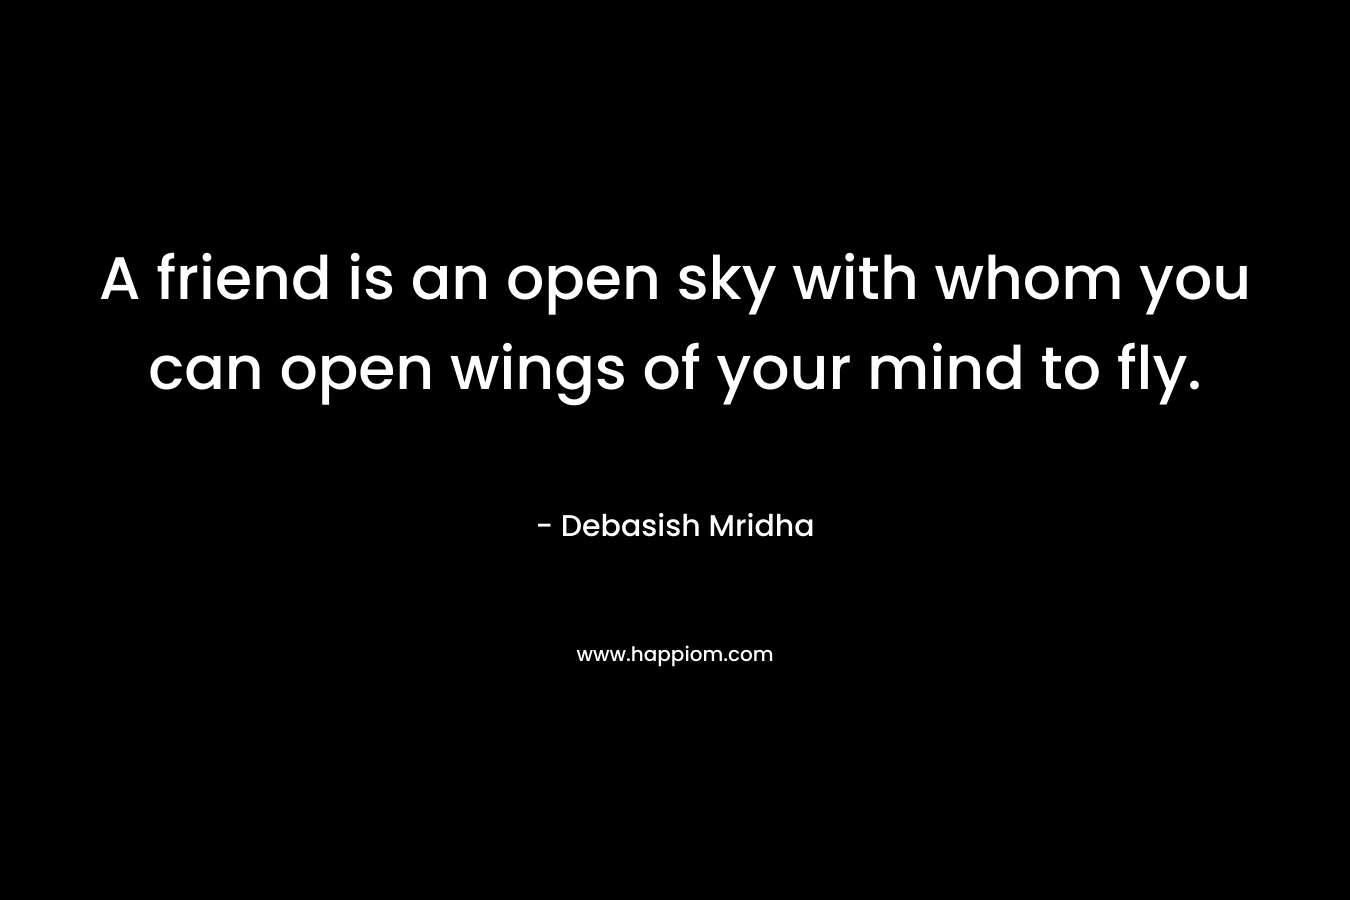 A friend is an open sky with whom you can open wings of your mind to fly.